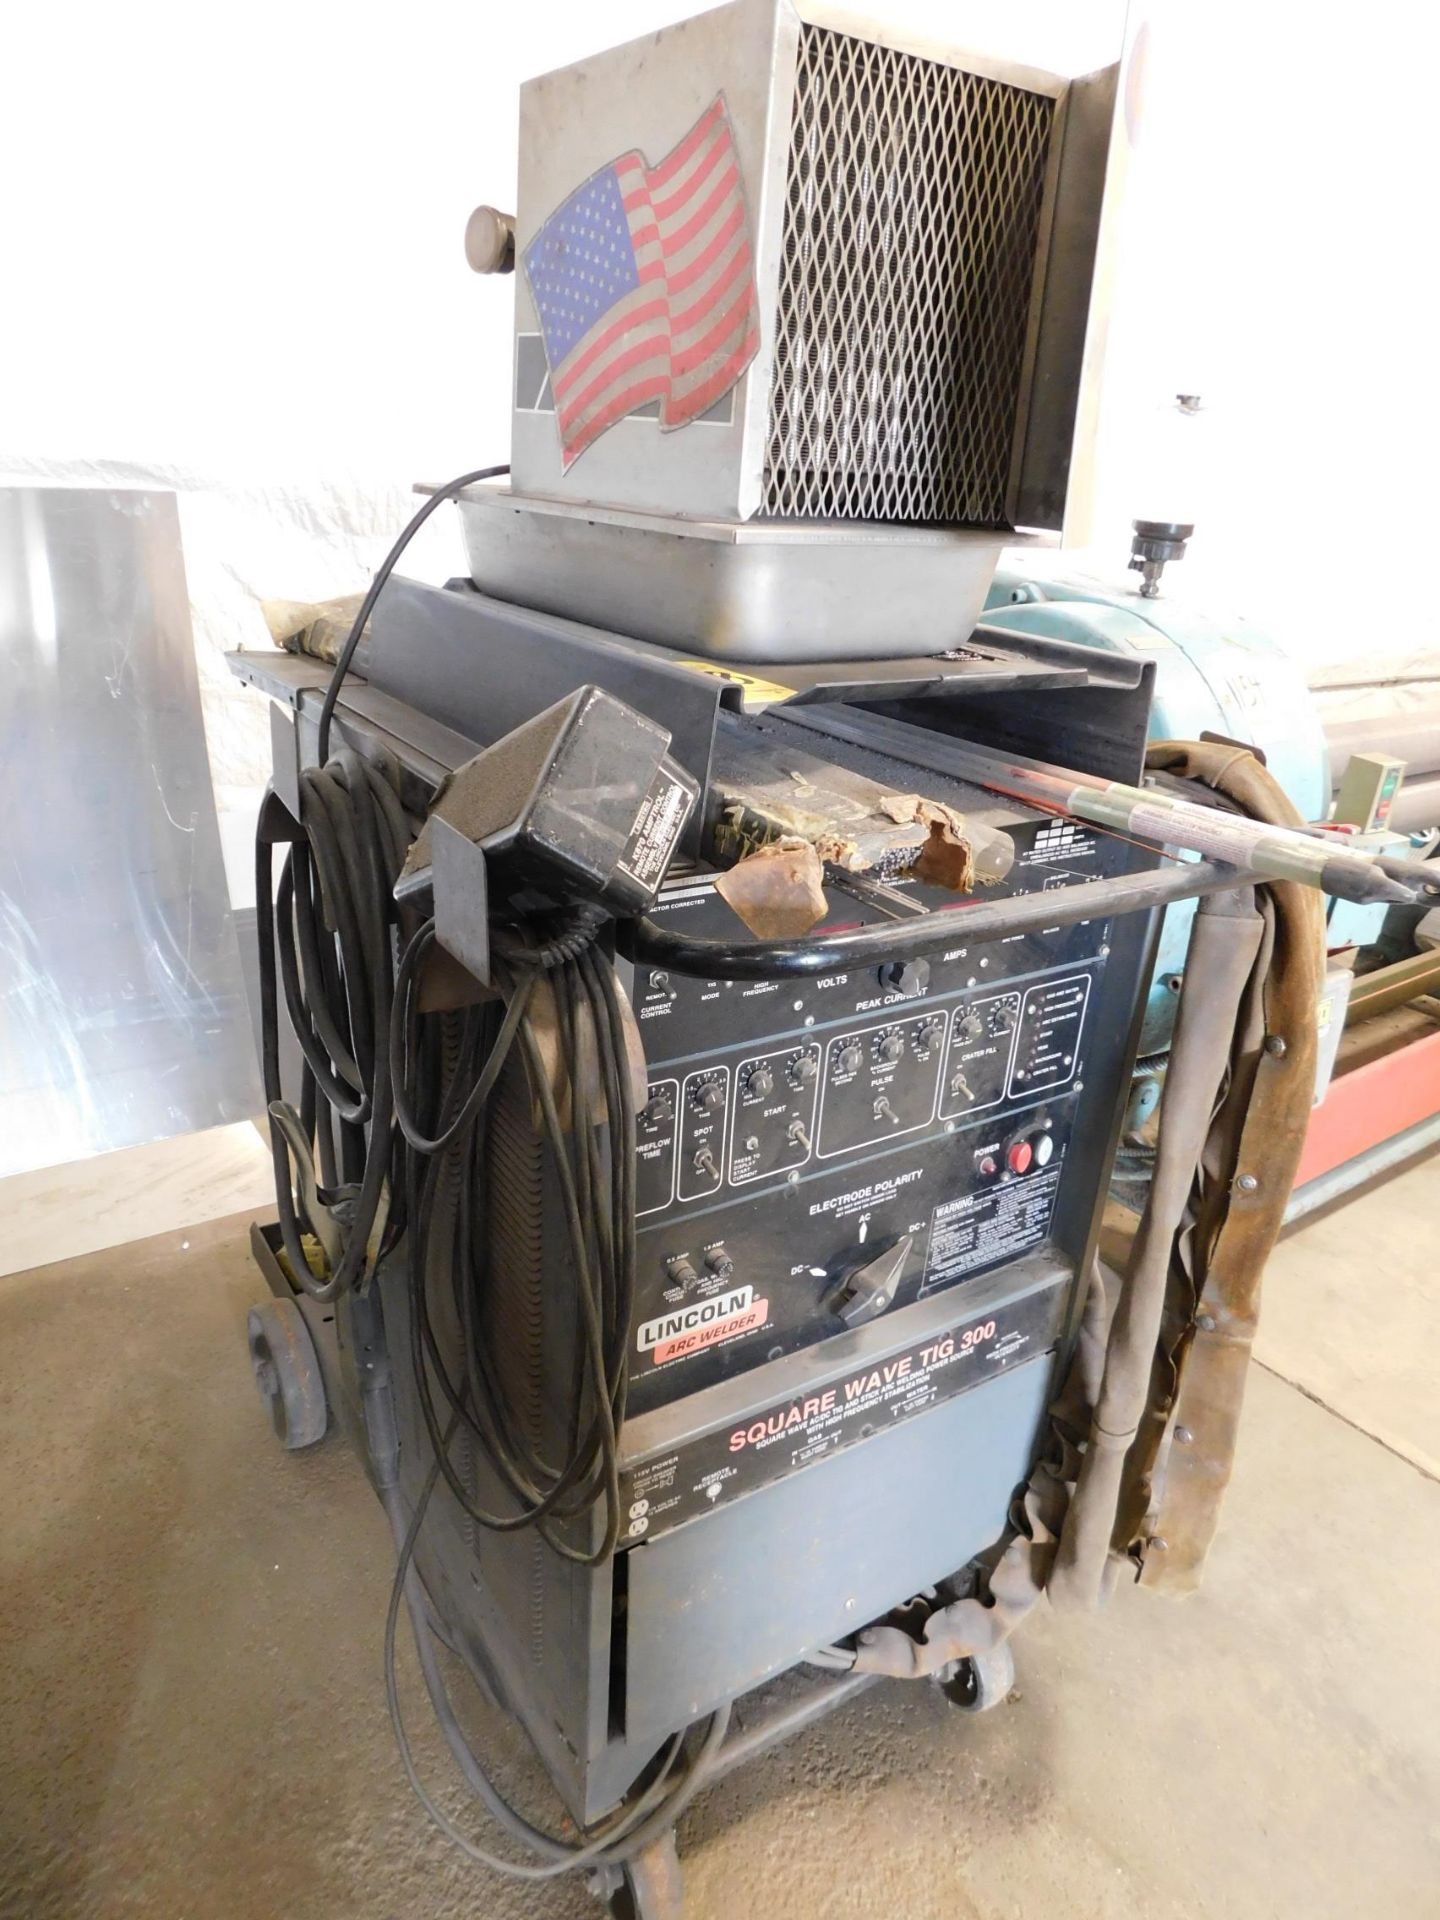 Lincoln Square Wave Tig 300 Tig Welder, SN AC665032, with Bernard Chiller, Foot Pedal Control, Tig - Image 2 of 5